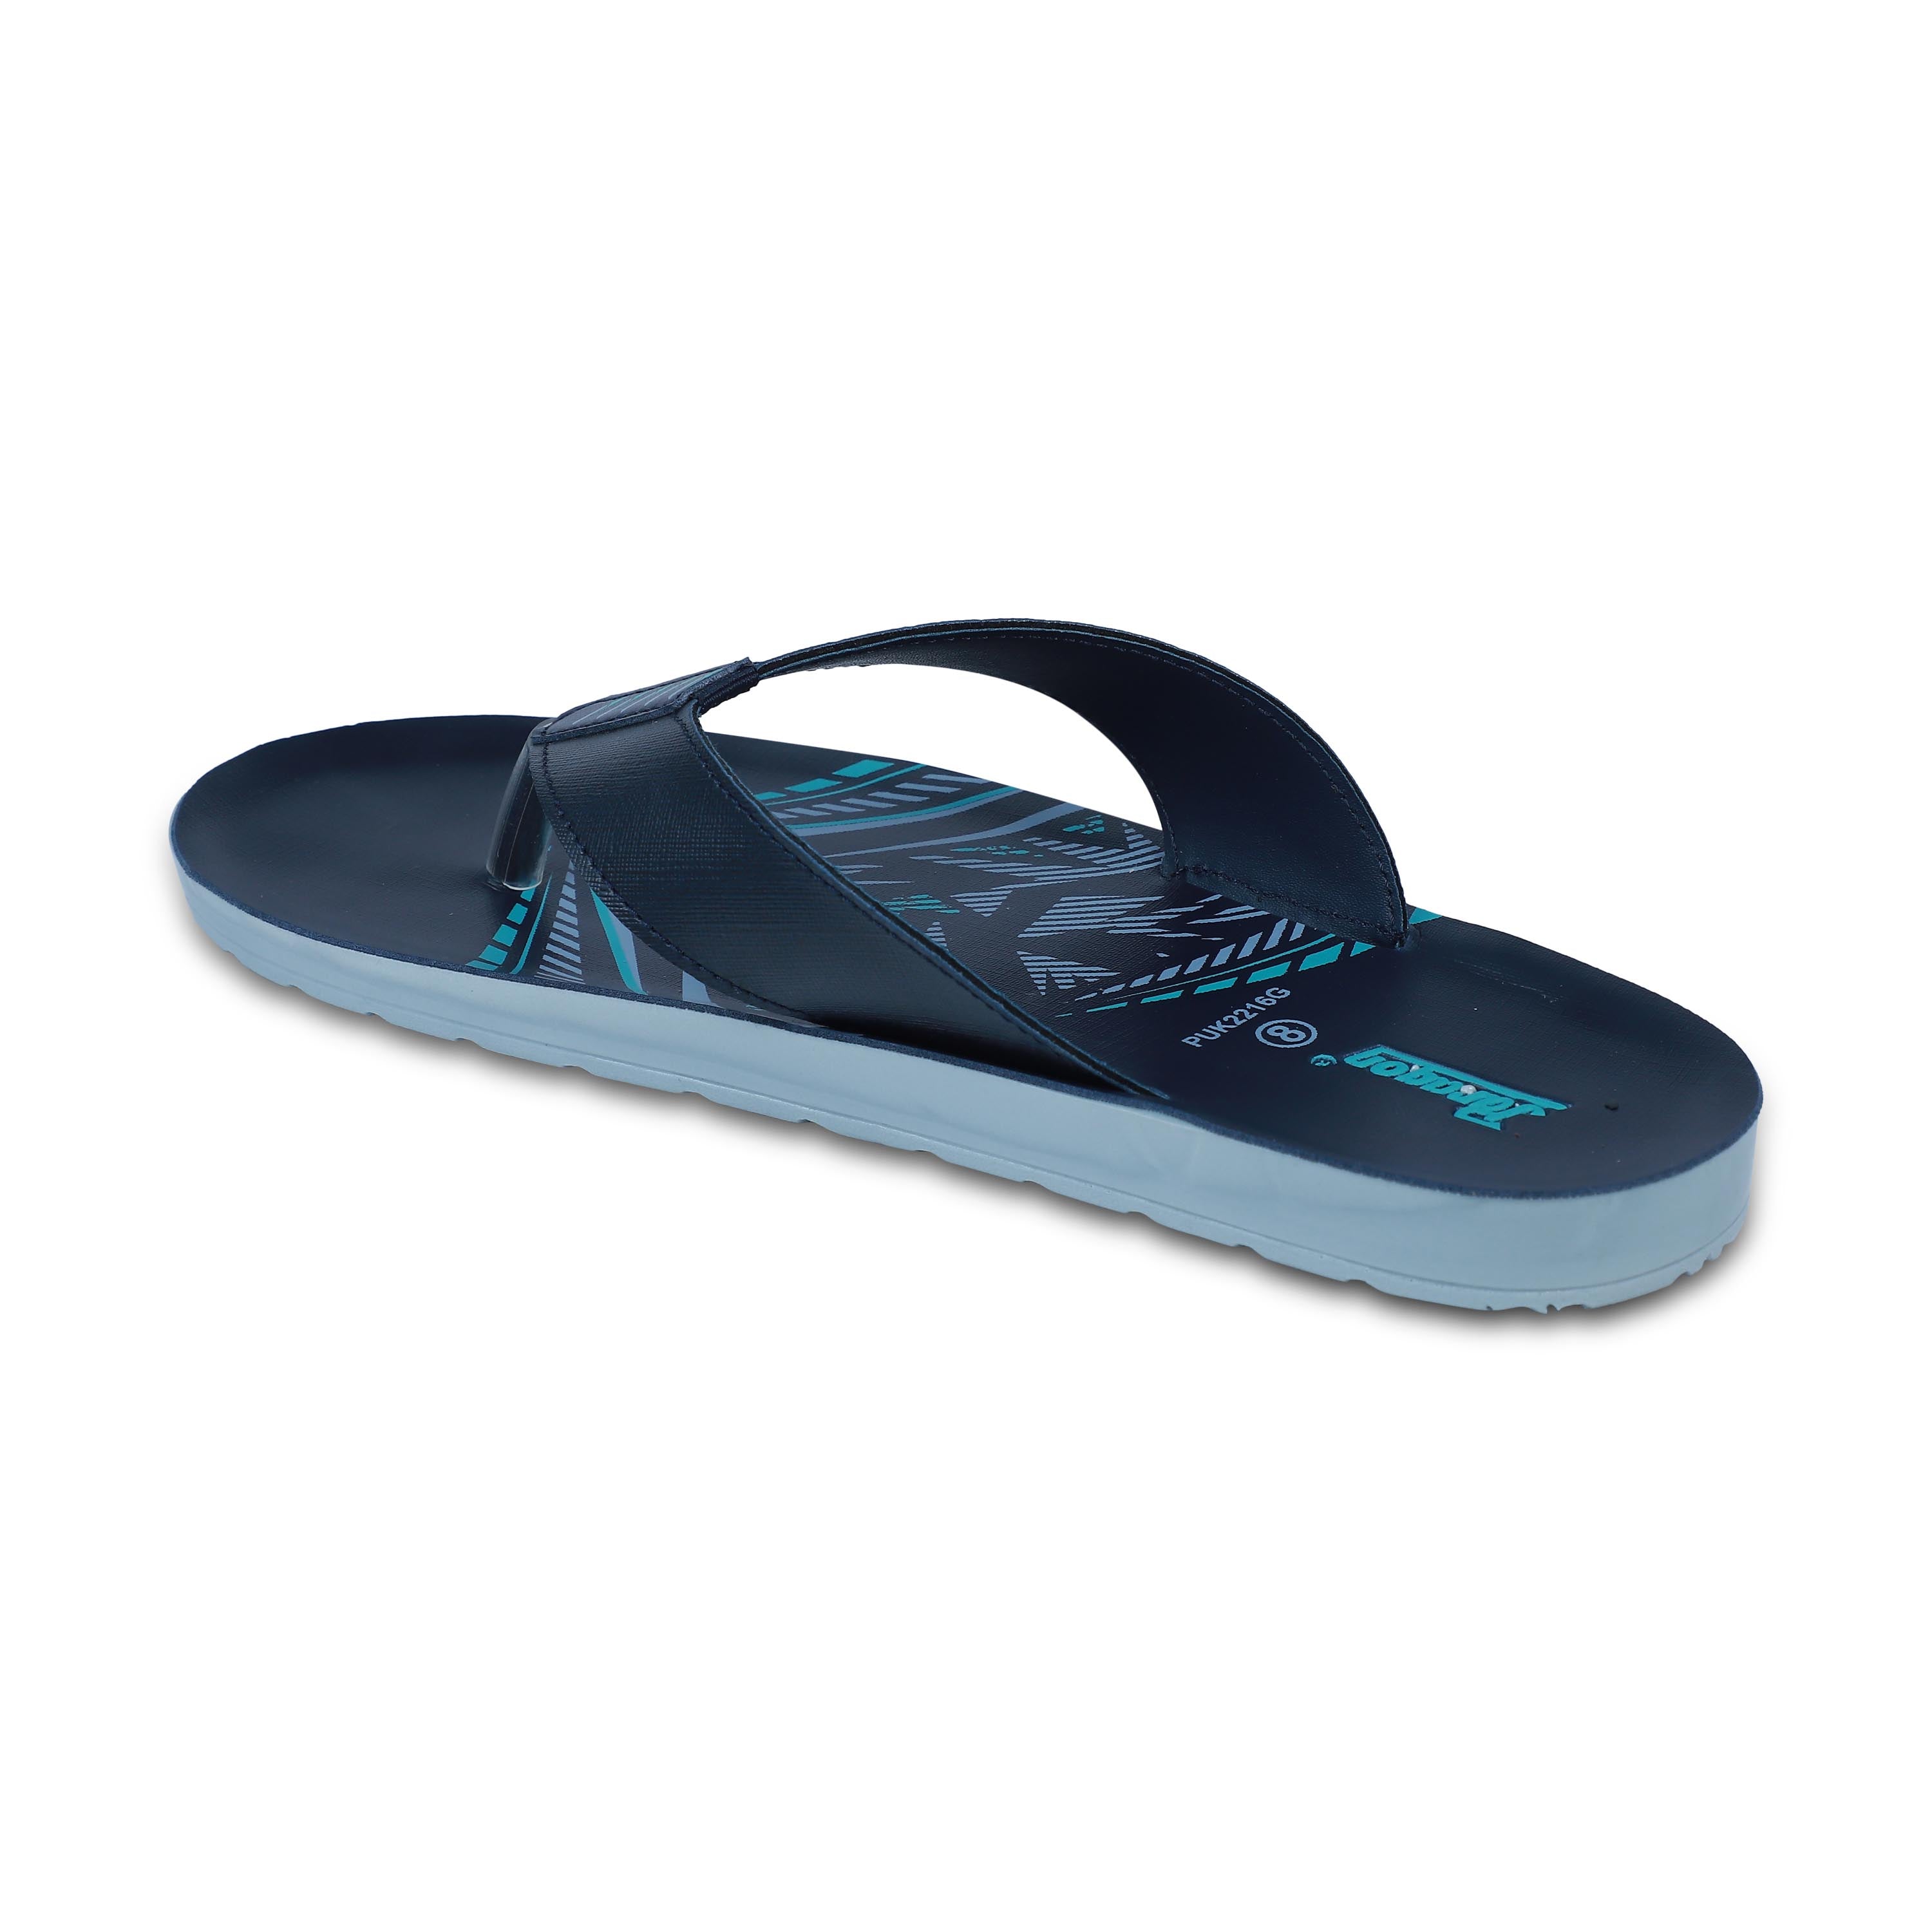 Paragon PUK2216G Men Everyday Lightweight Waterproof Flip Flops Printed Patterns and Extra Sole Support | Casual Flip Flops